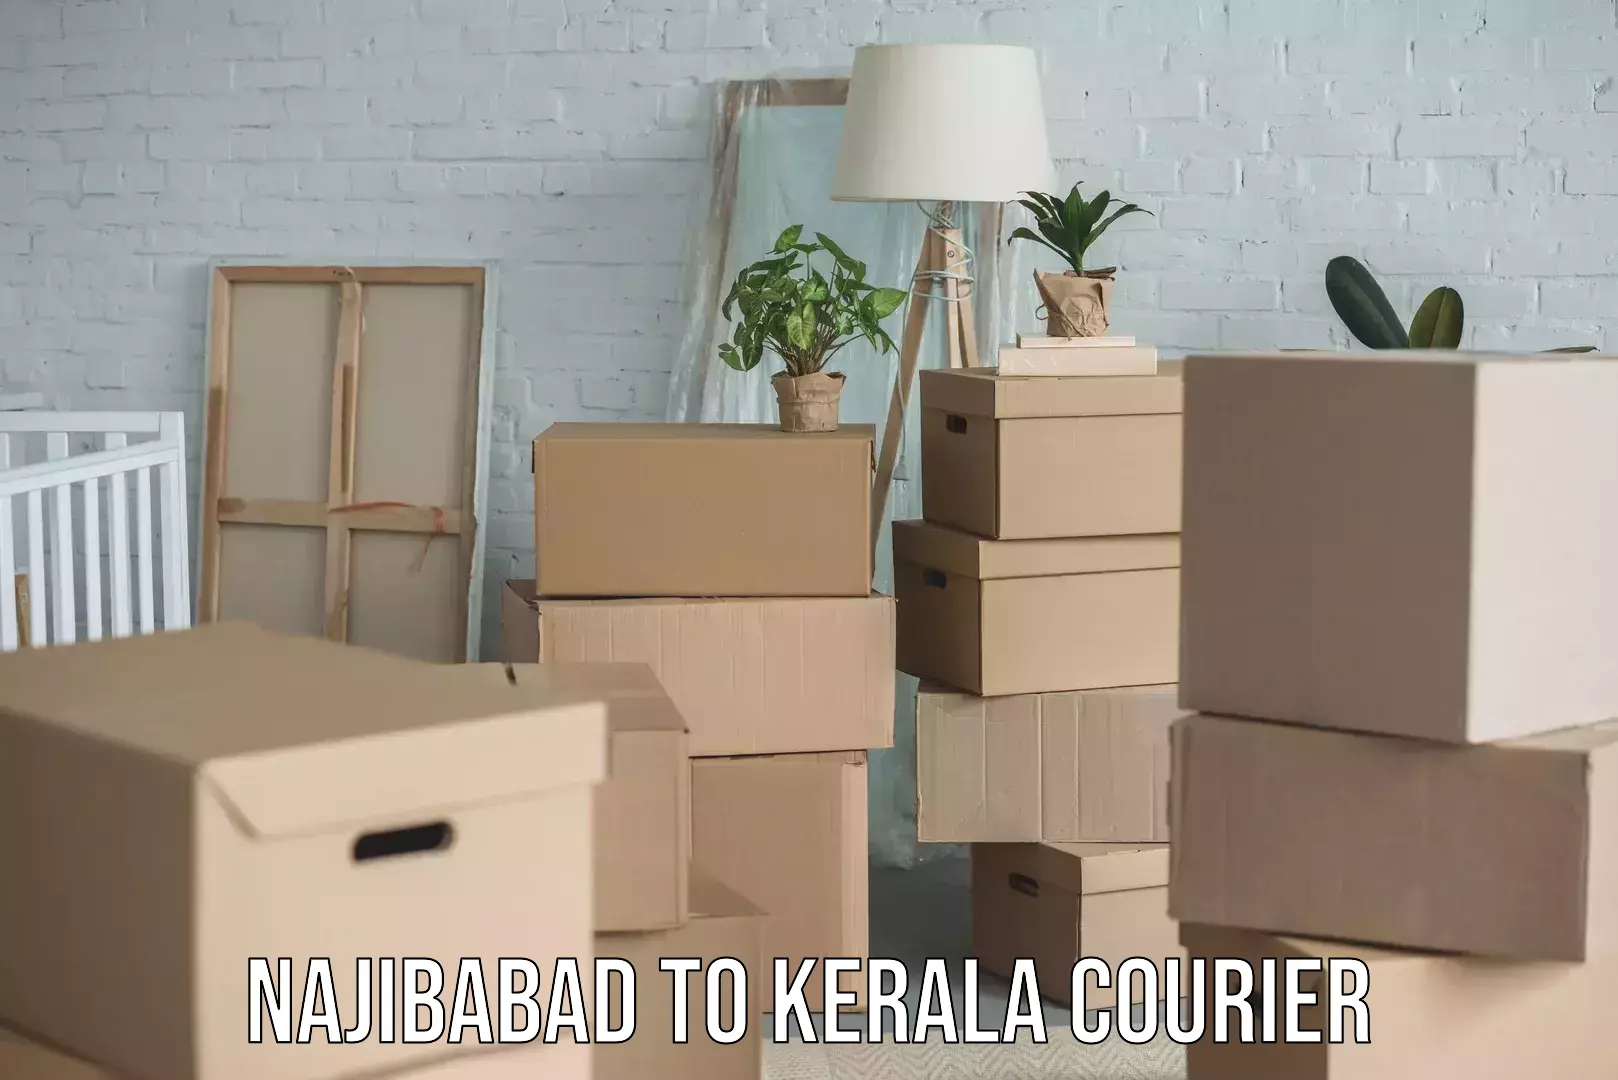 Home moving specialists Najibabad to Kerala